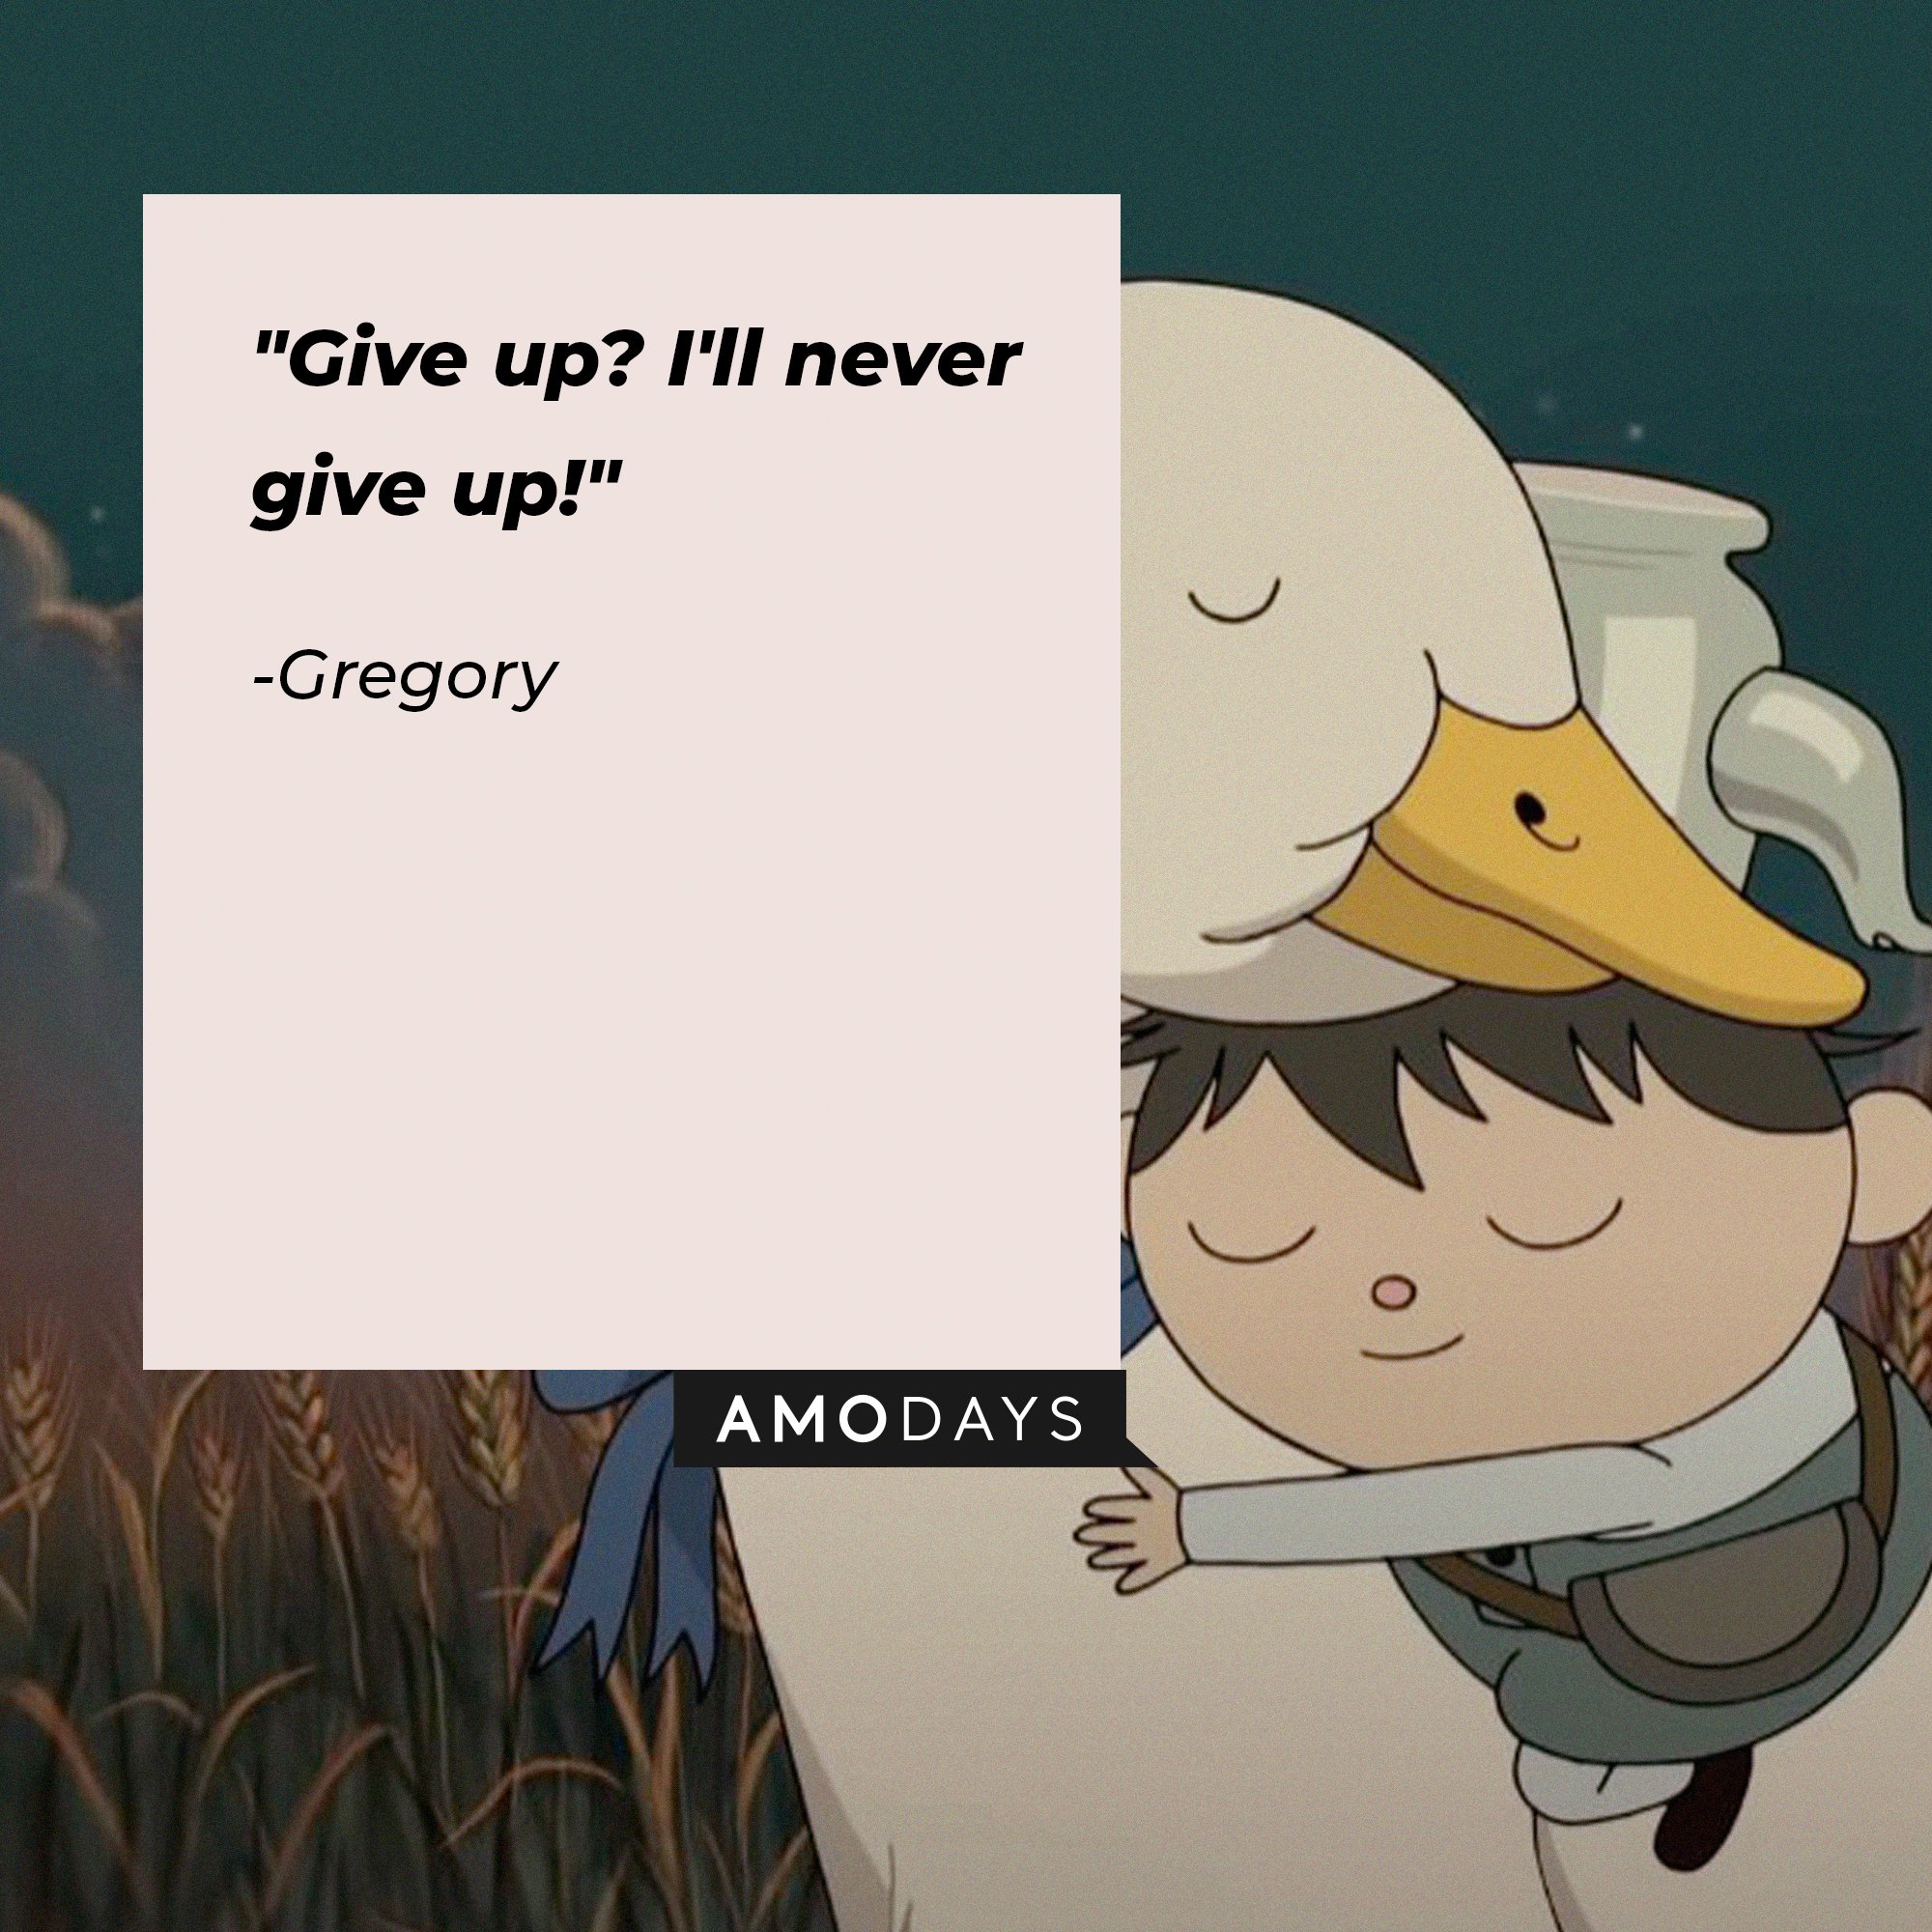 Gregory’s quote: "Give up? I'll never give up!" | Image: AmoDays